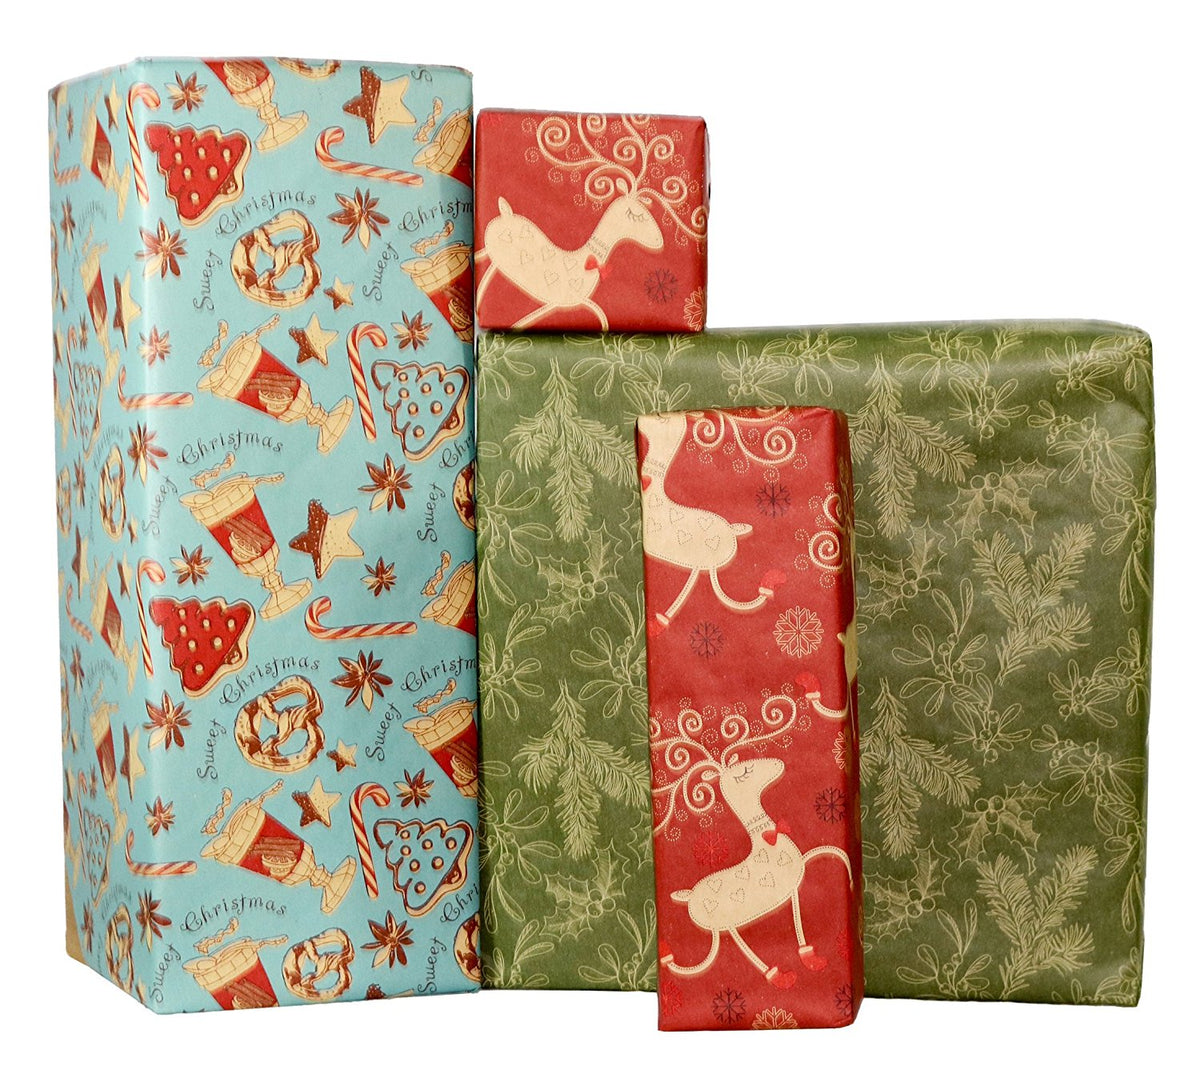 Meuva Christmas Vintage Kraft Paper Wrapping Paper DIY Gift Wrapping Paper  Christmas Wrapping Paper Kits Plain Wrapping Paper Newspaper Wrapping Paper